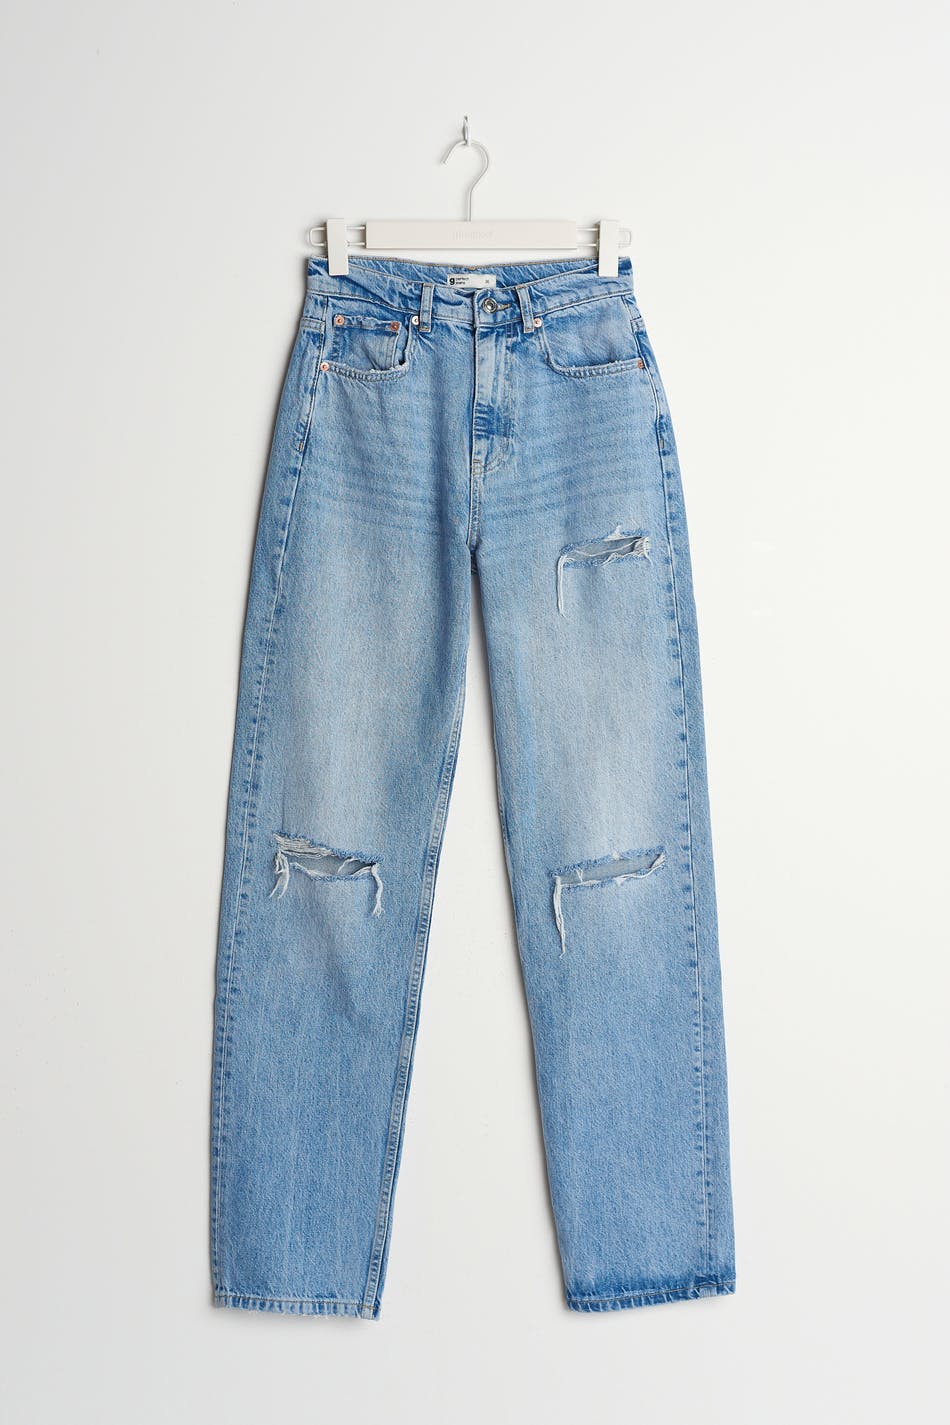 90s TALL jeans